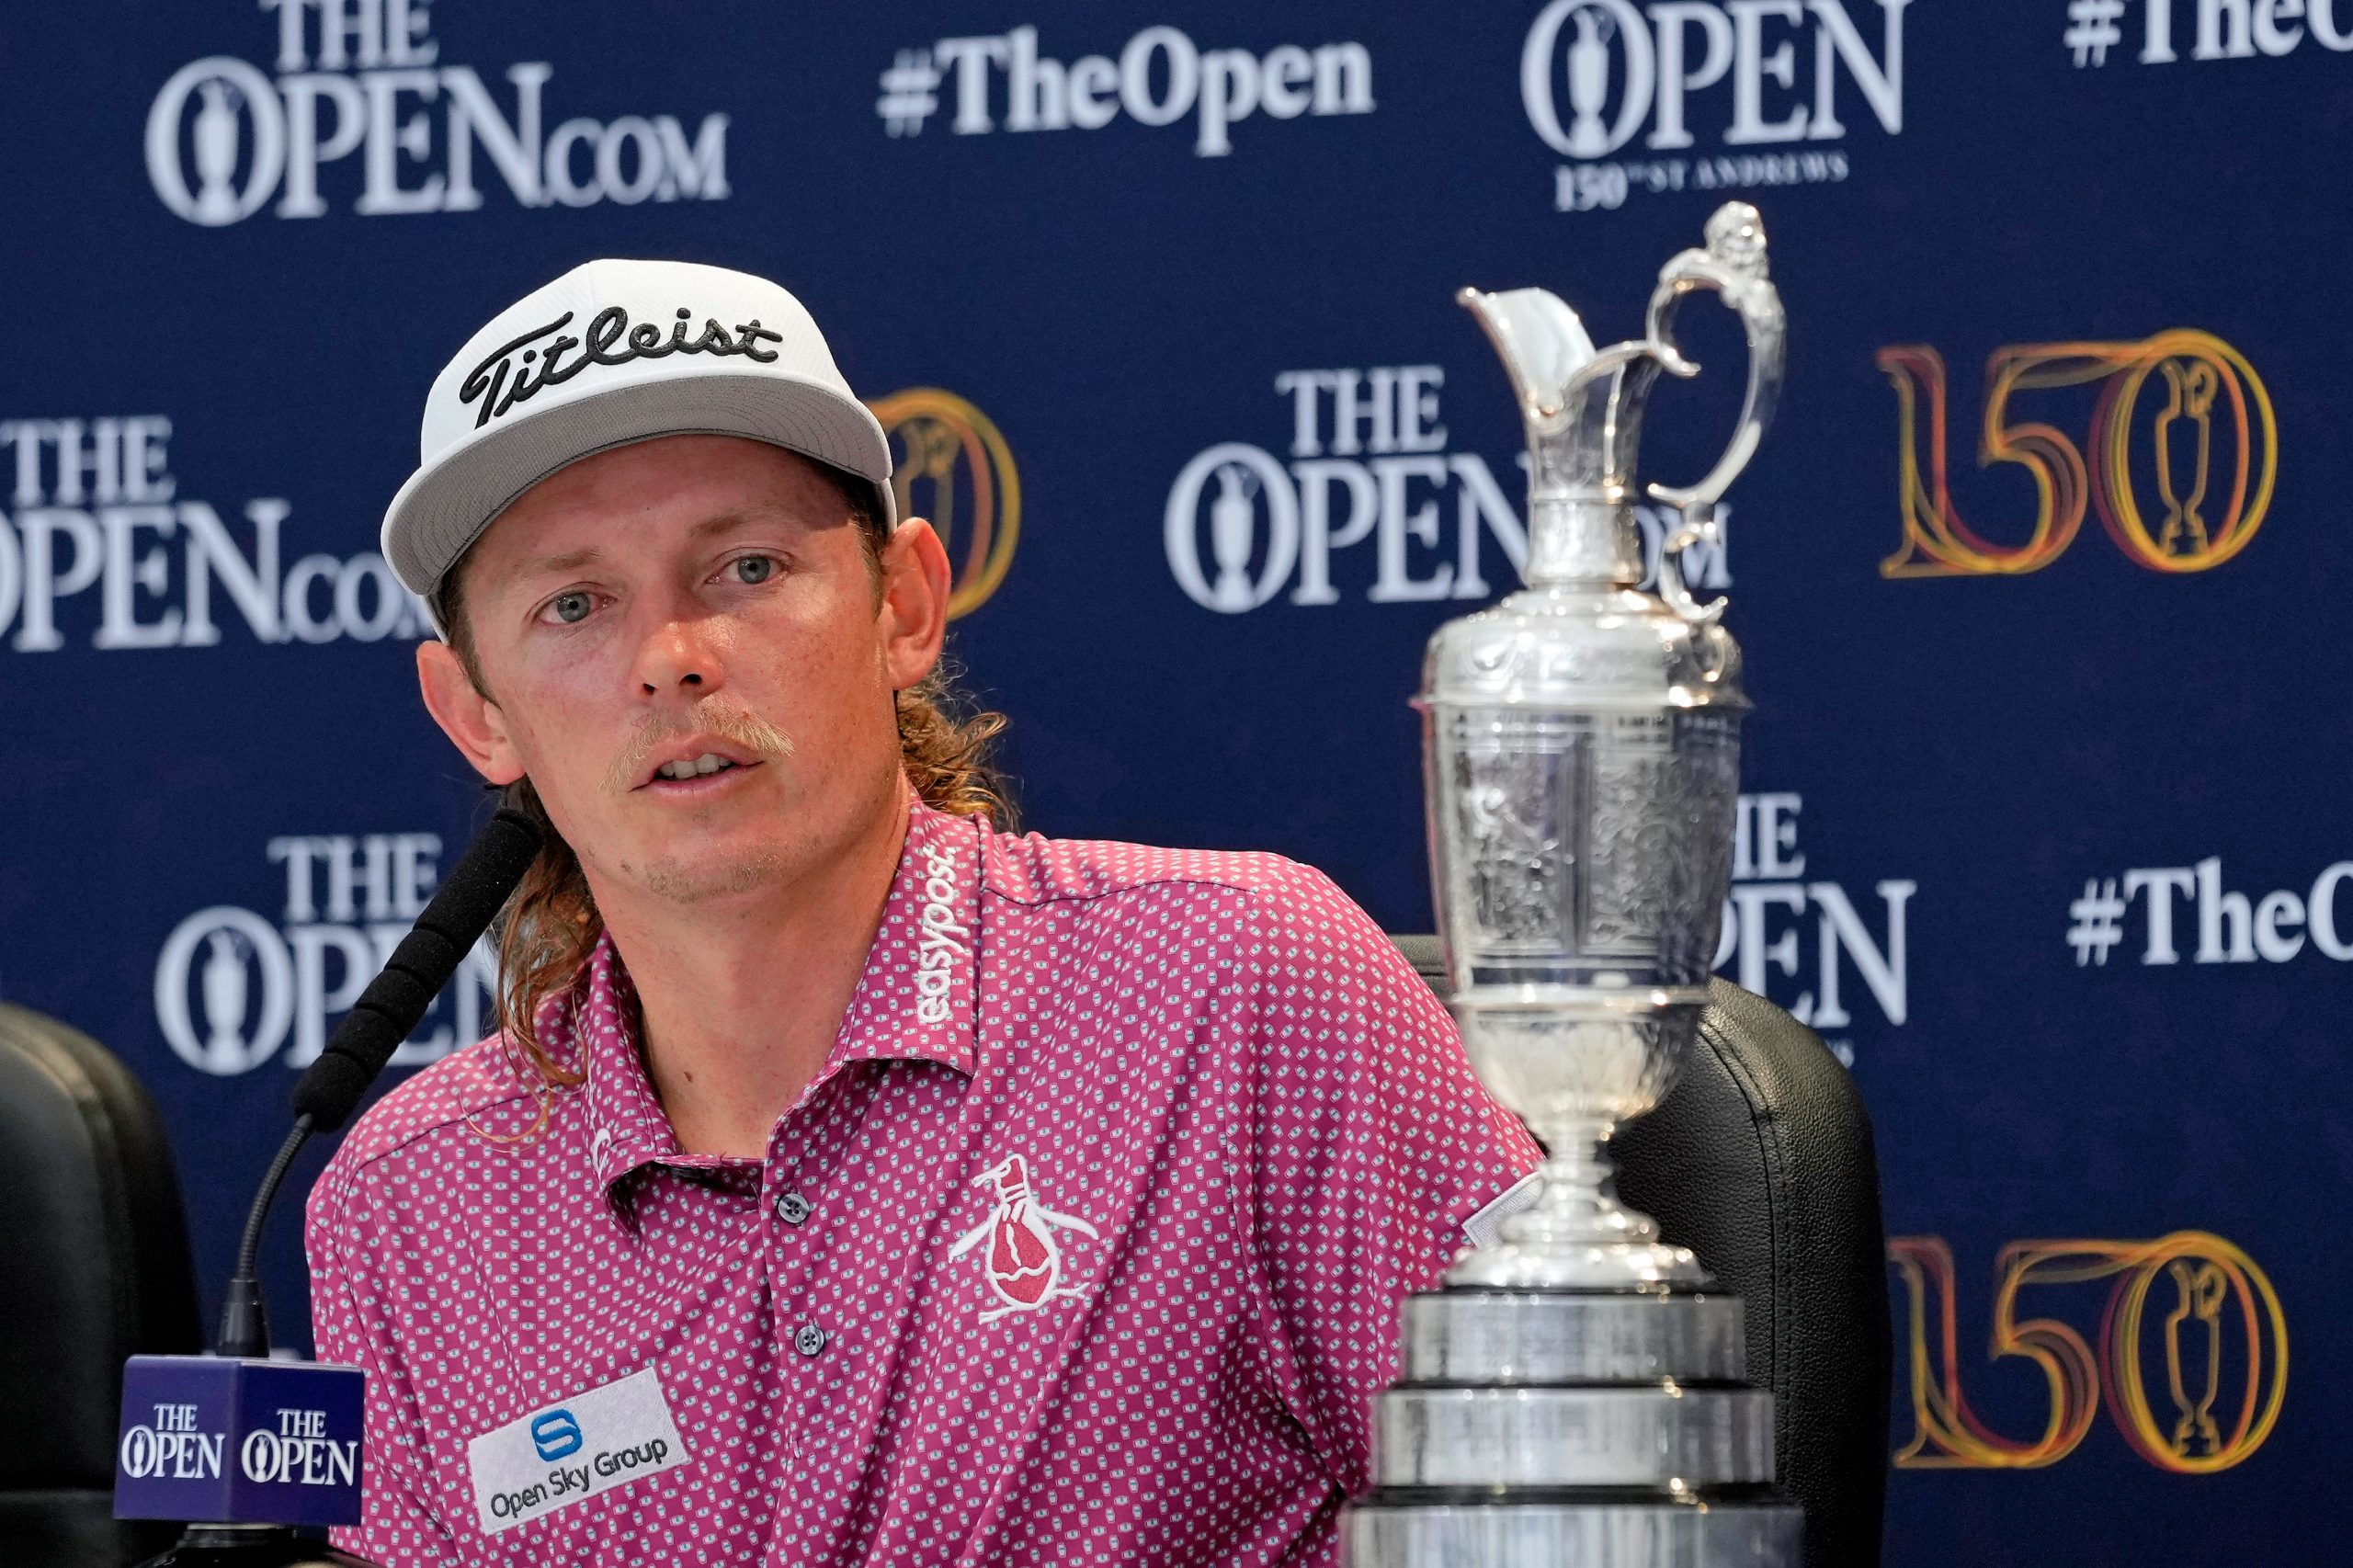 Cameron Smith talks to media during a press conference after winning the 150th Open Championship golf tournament at St. Andrews Old Course.